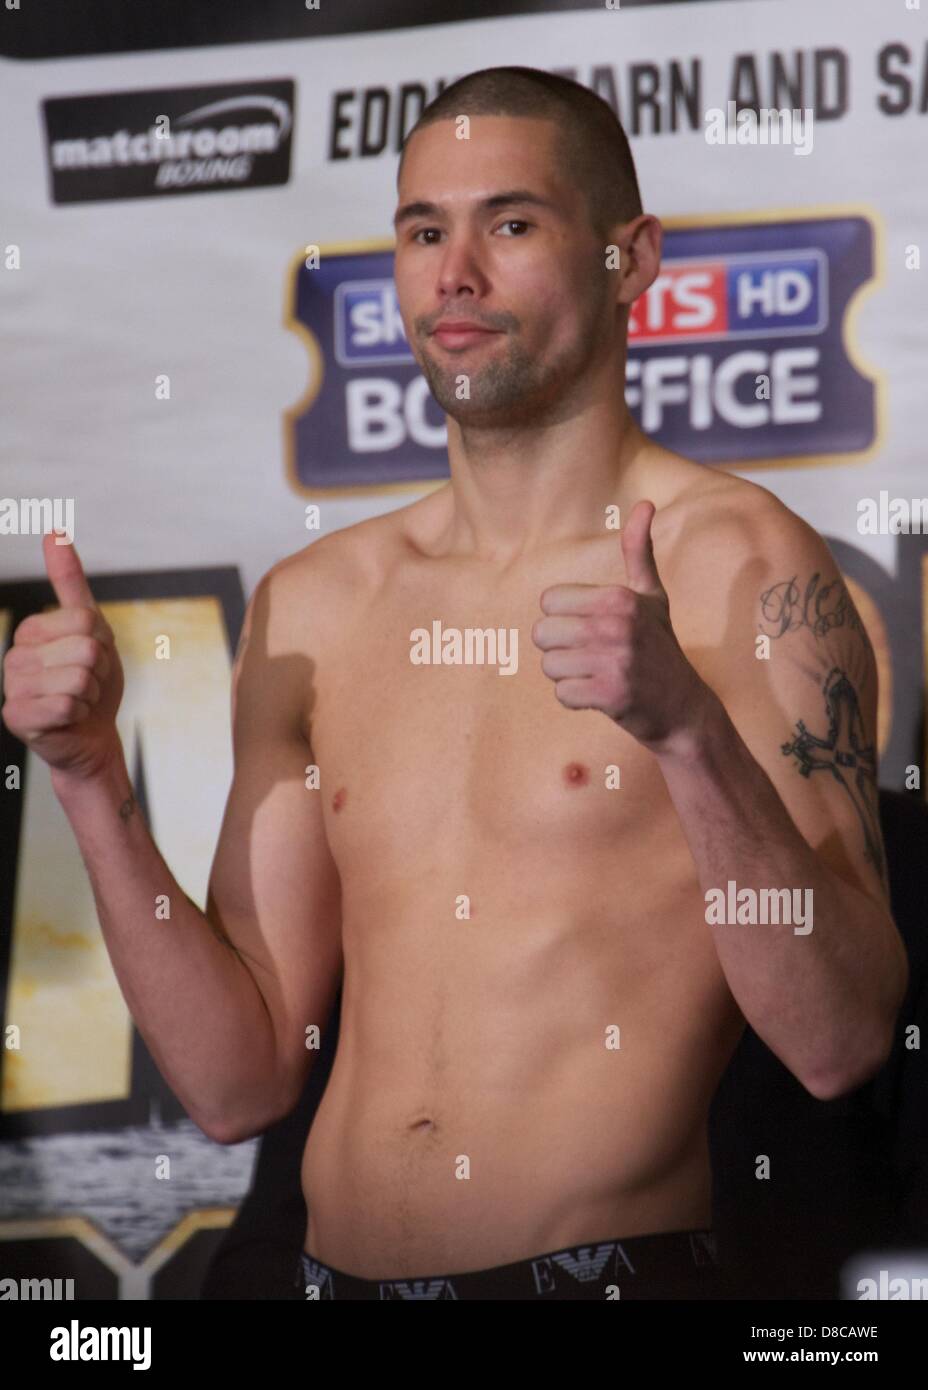 London, UK. 24th May 2013. Liverpool boxer Tony Bellew weighs in at the London O2 Piazza ahead of his Light Heavyweight rematch against South African Isaac Chilemba. Credit:  Paul McCabe / Alamy Live News Stock Photo